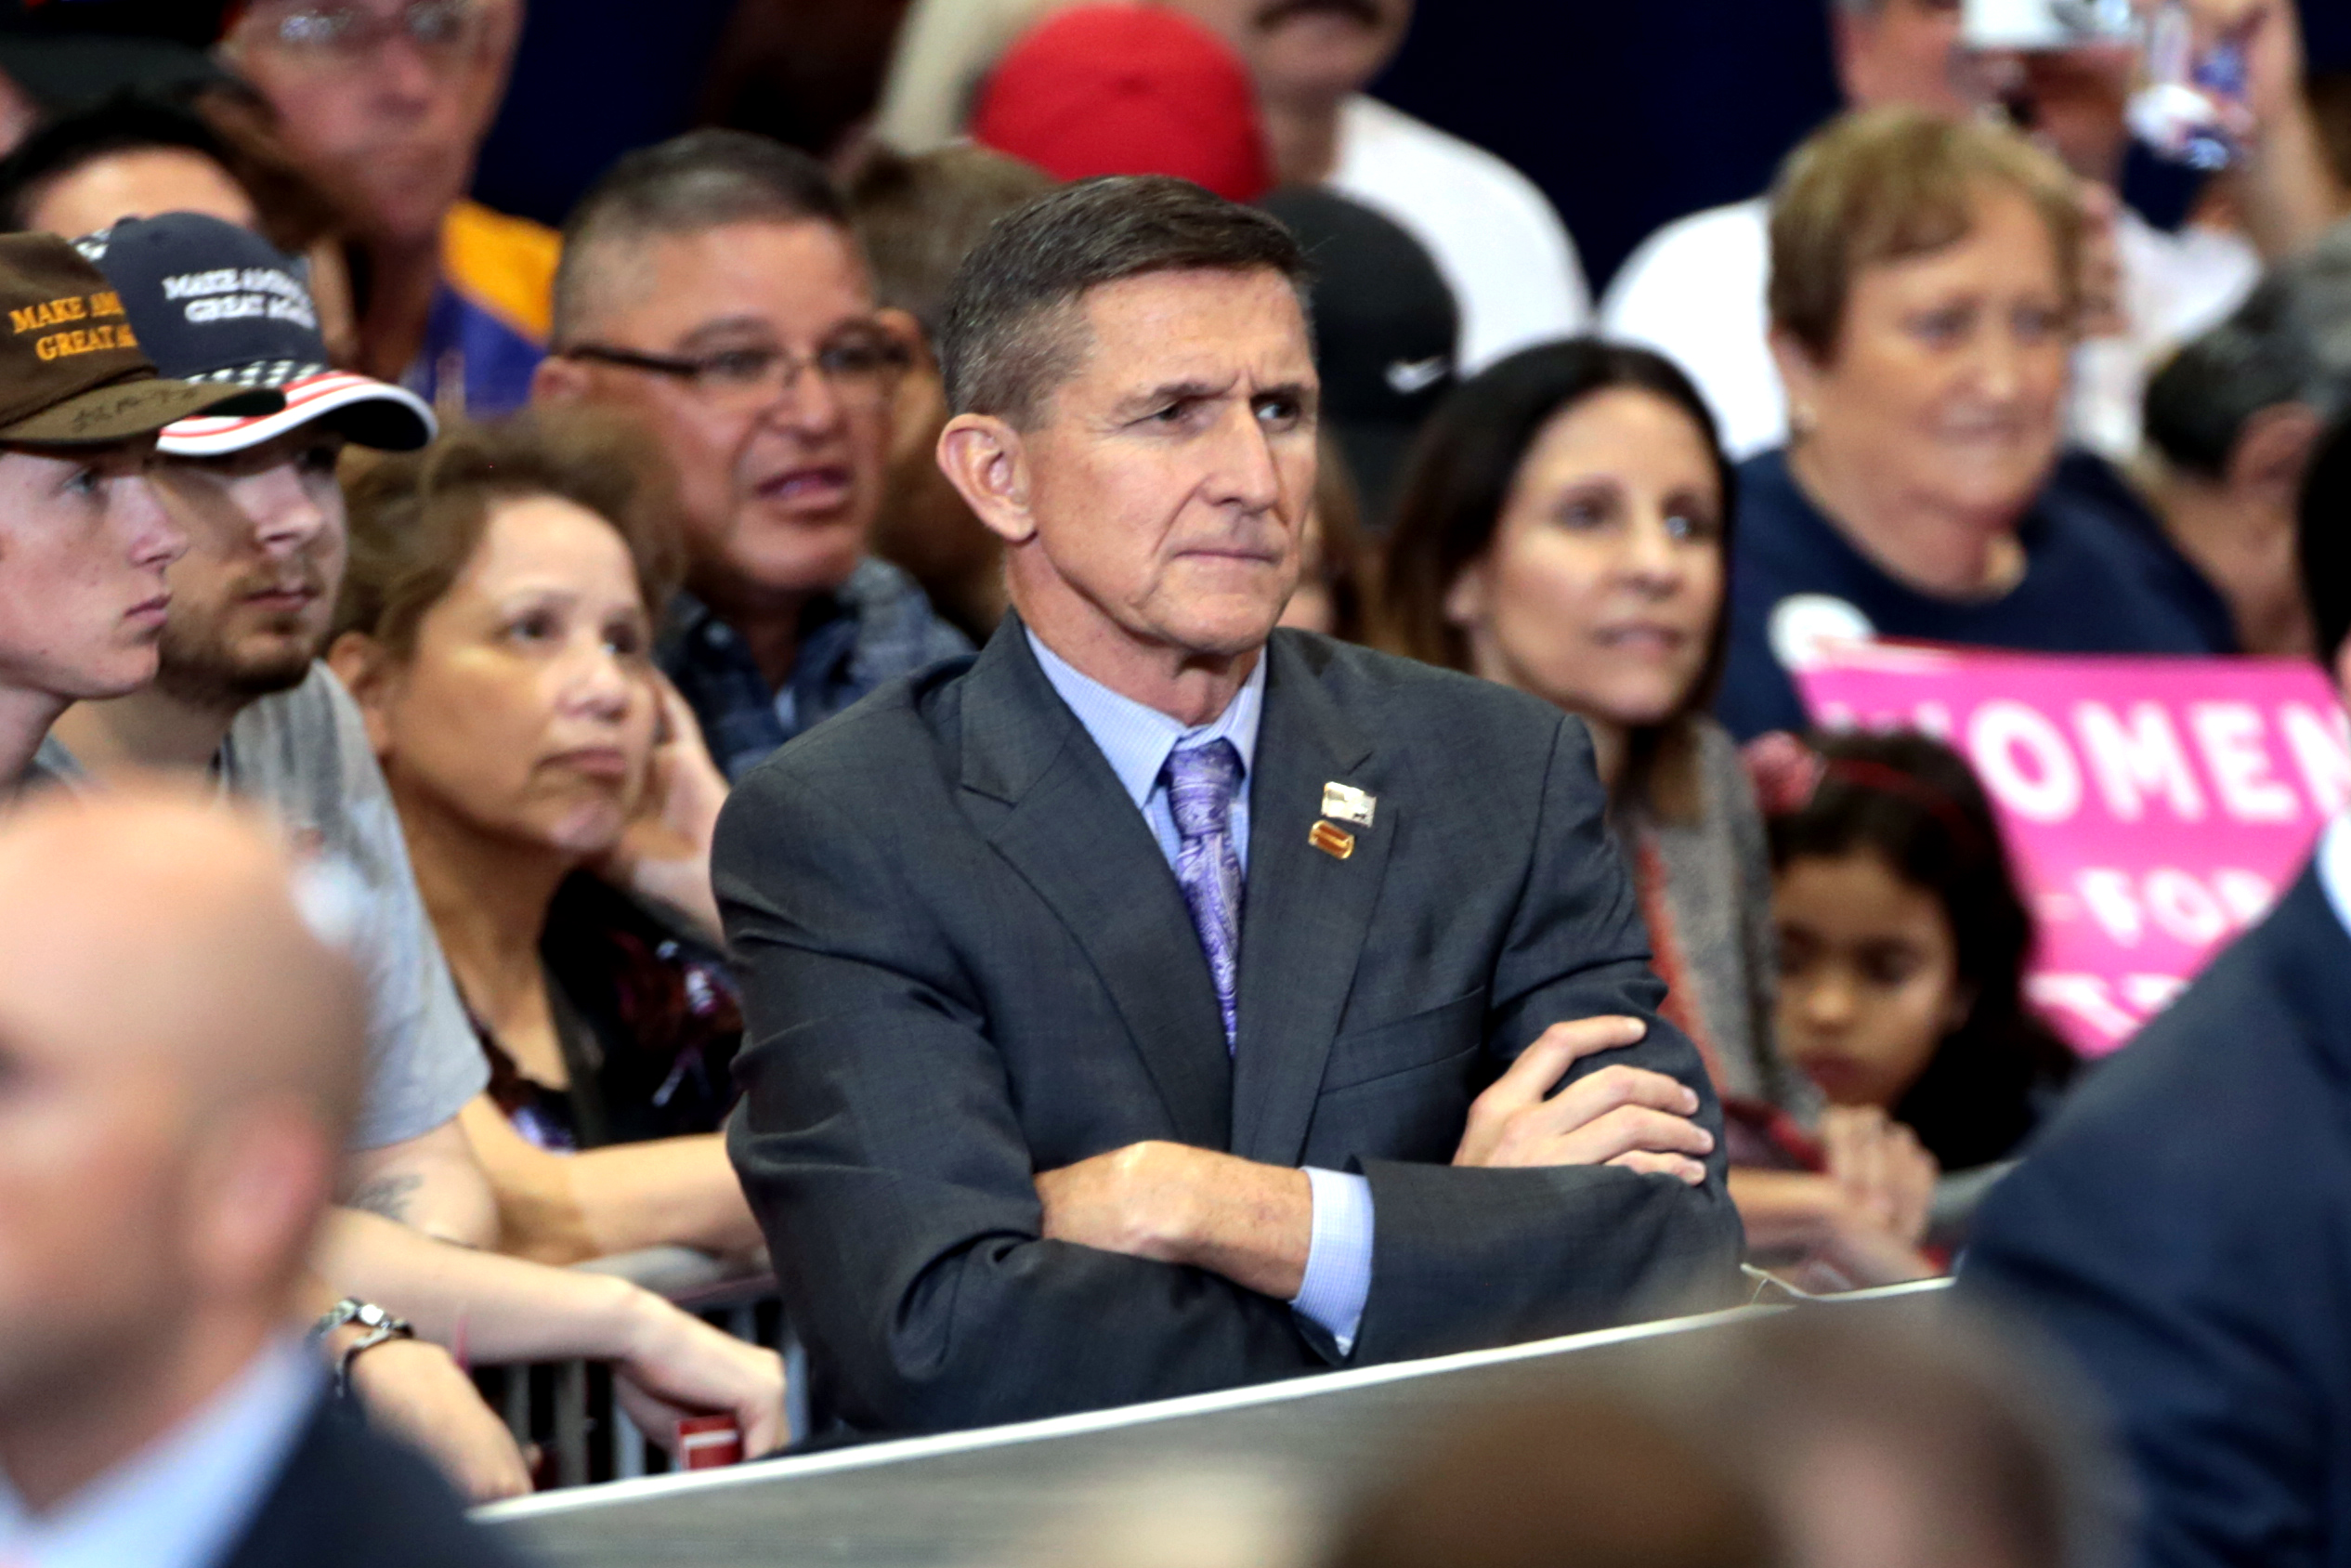 Michael Flynn at the 2016 Republican National Convention